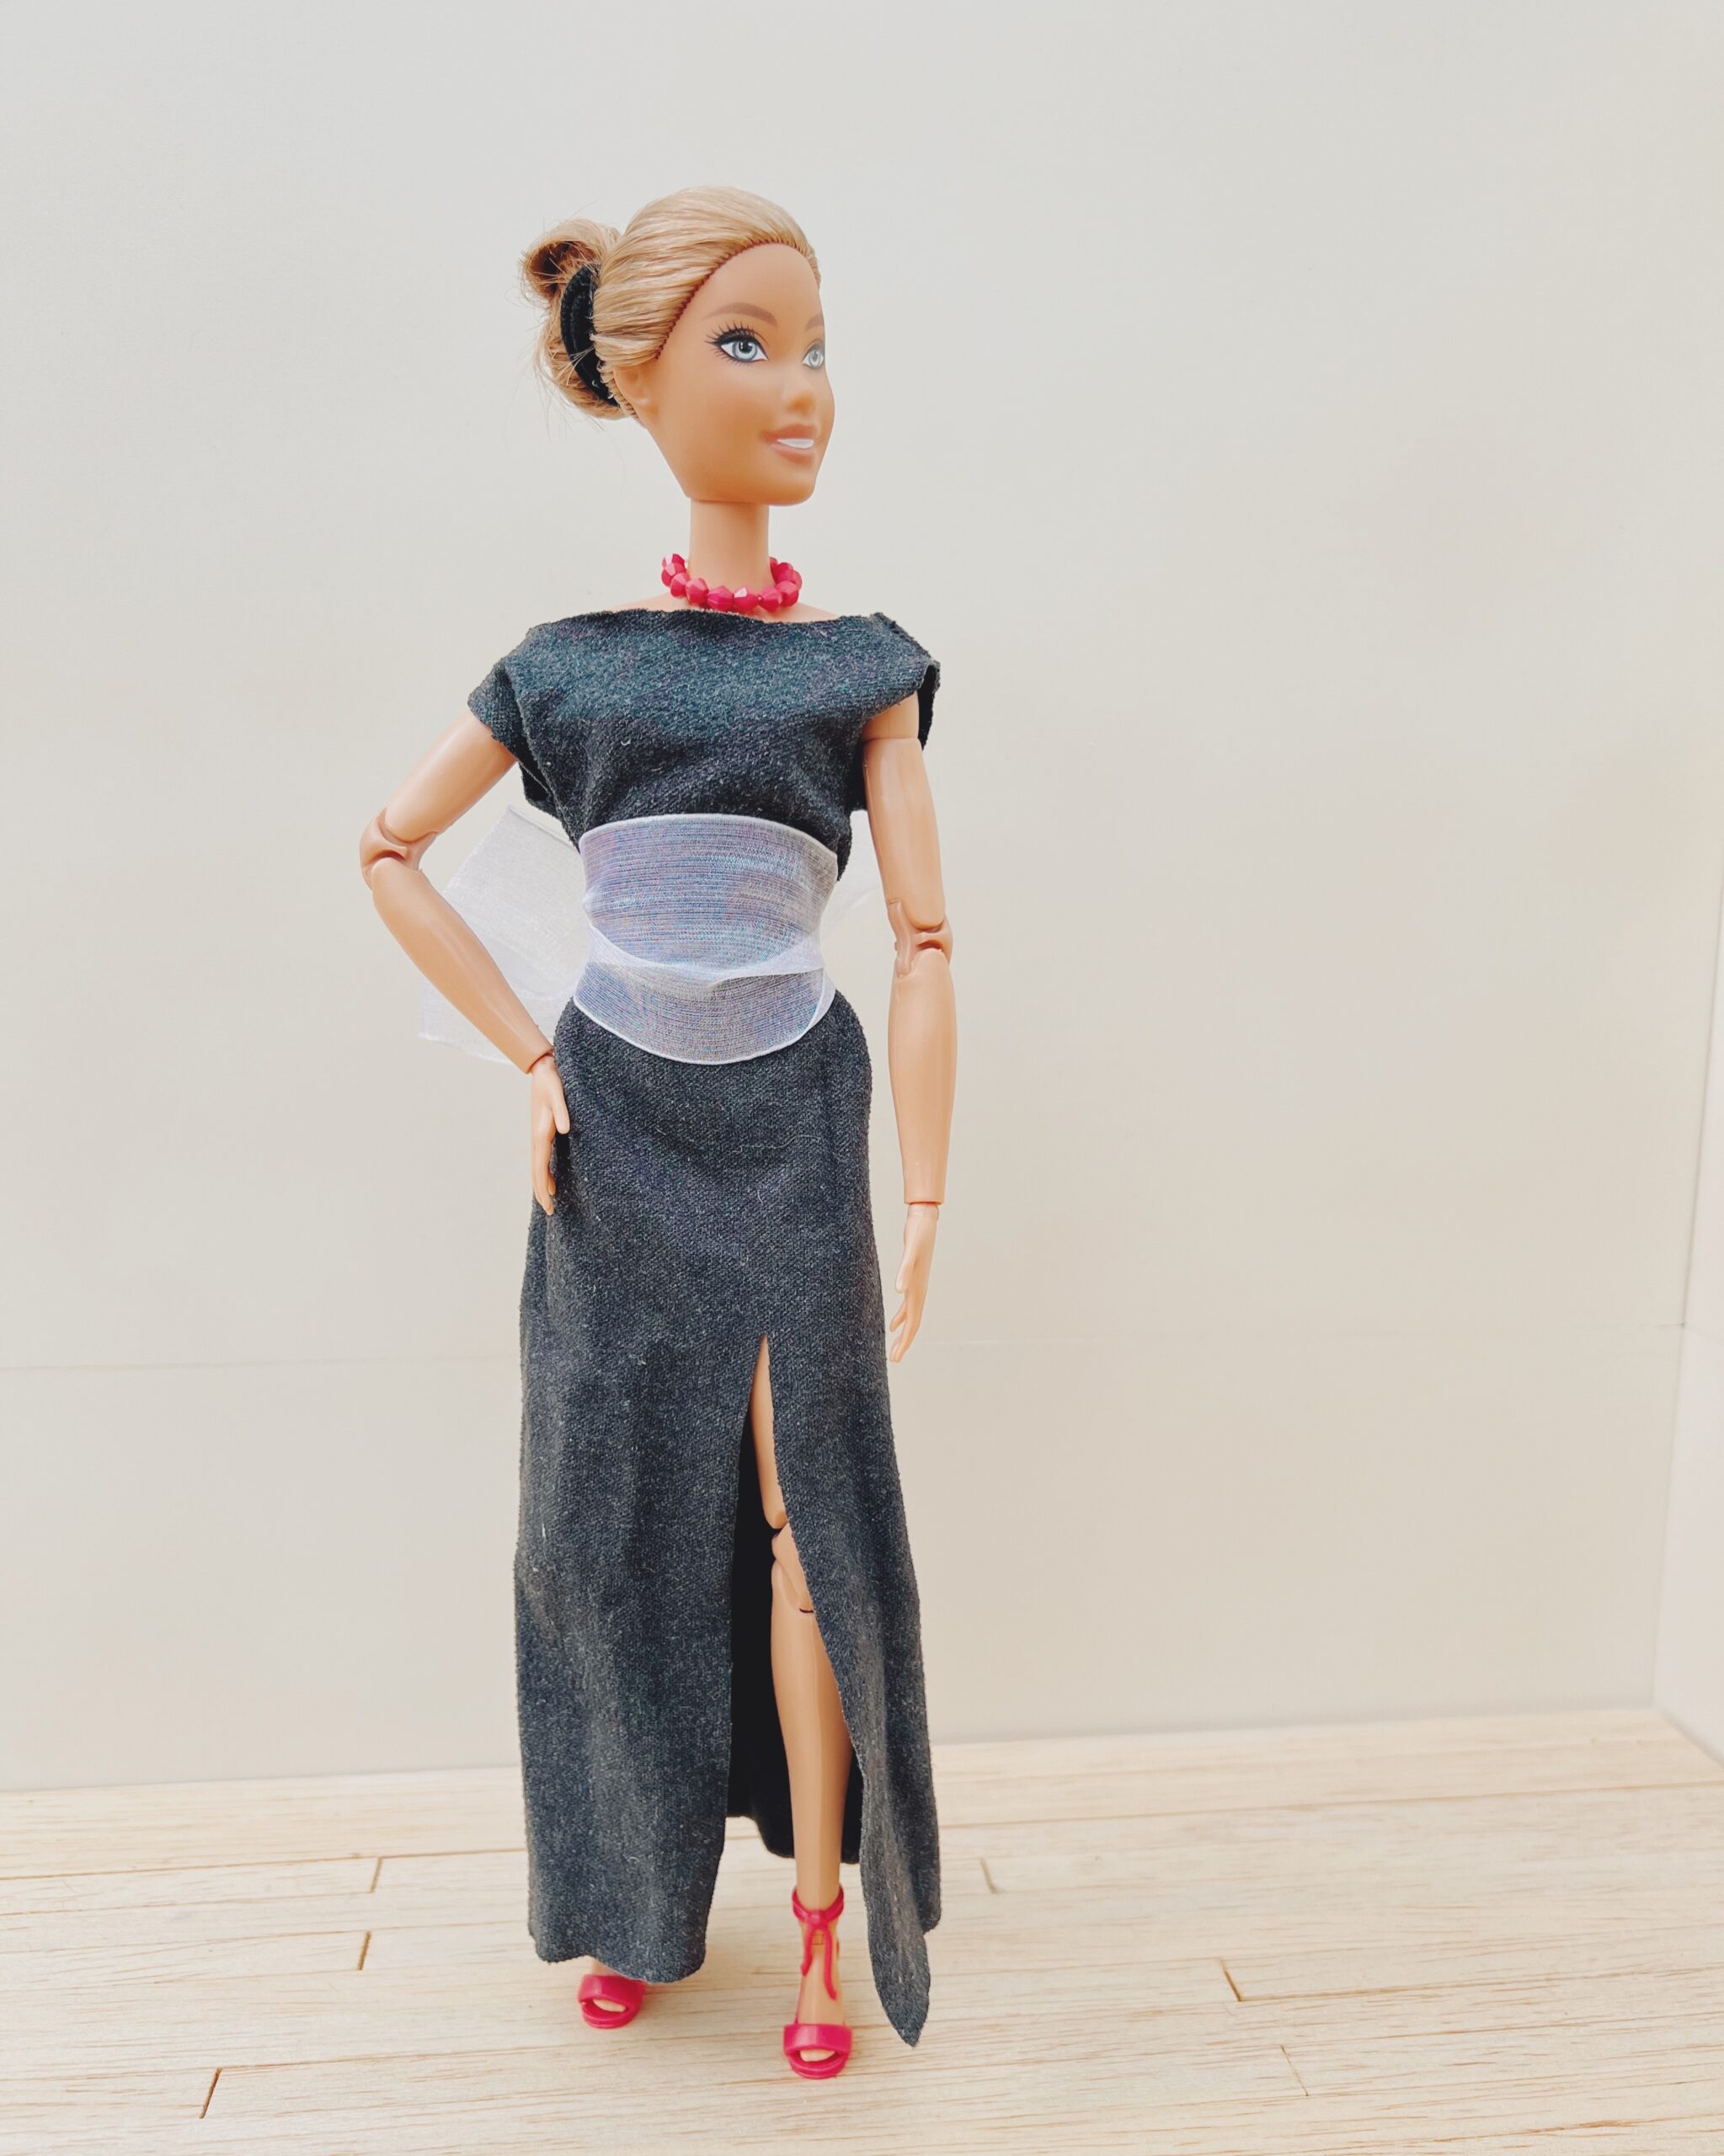 DIY Barbie Blog : Easy No Sew Wrap Dress for Barbie from Old T